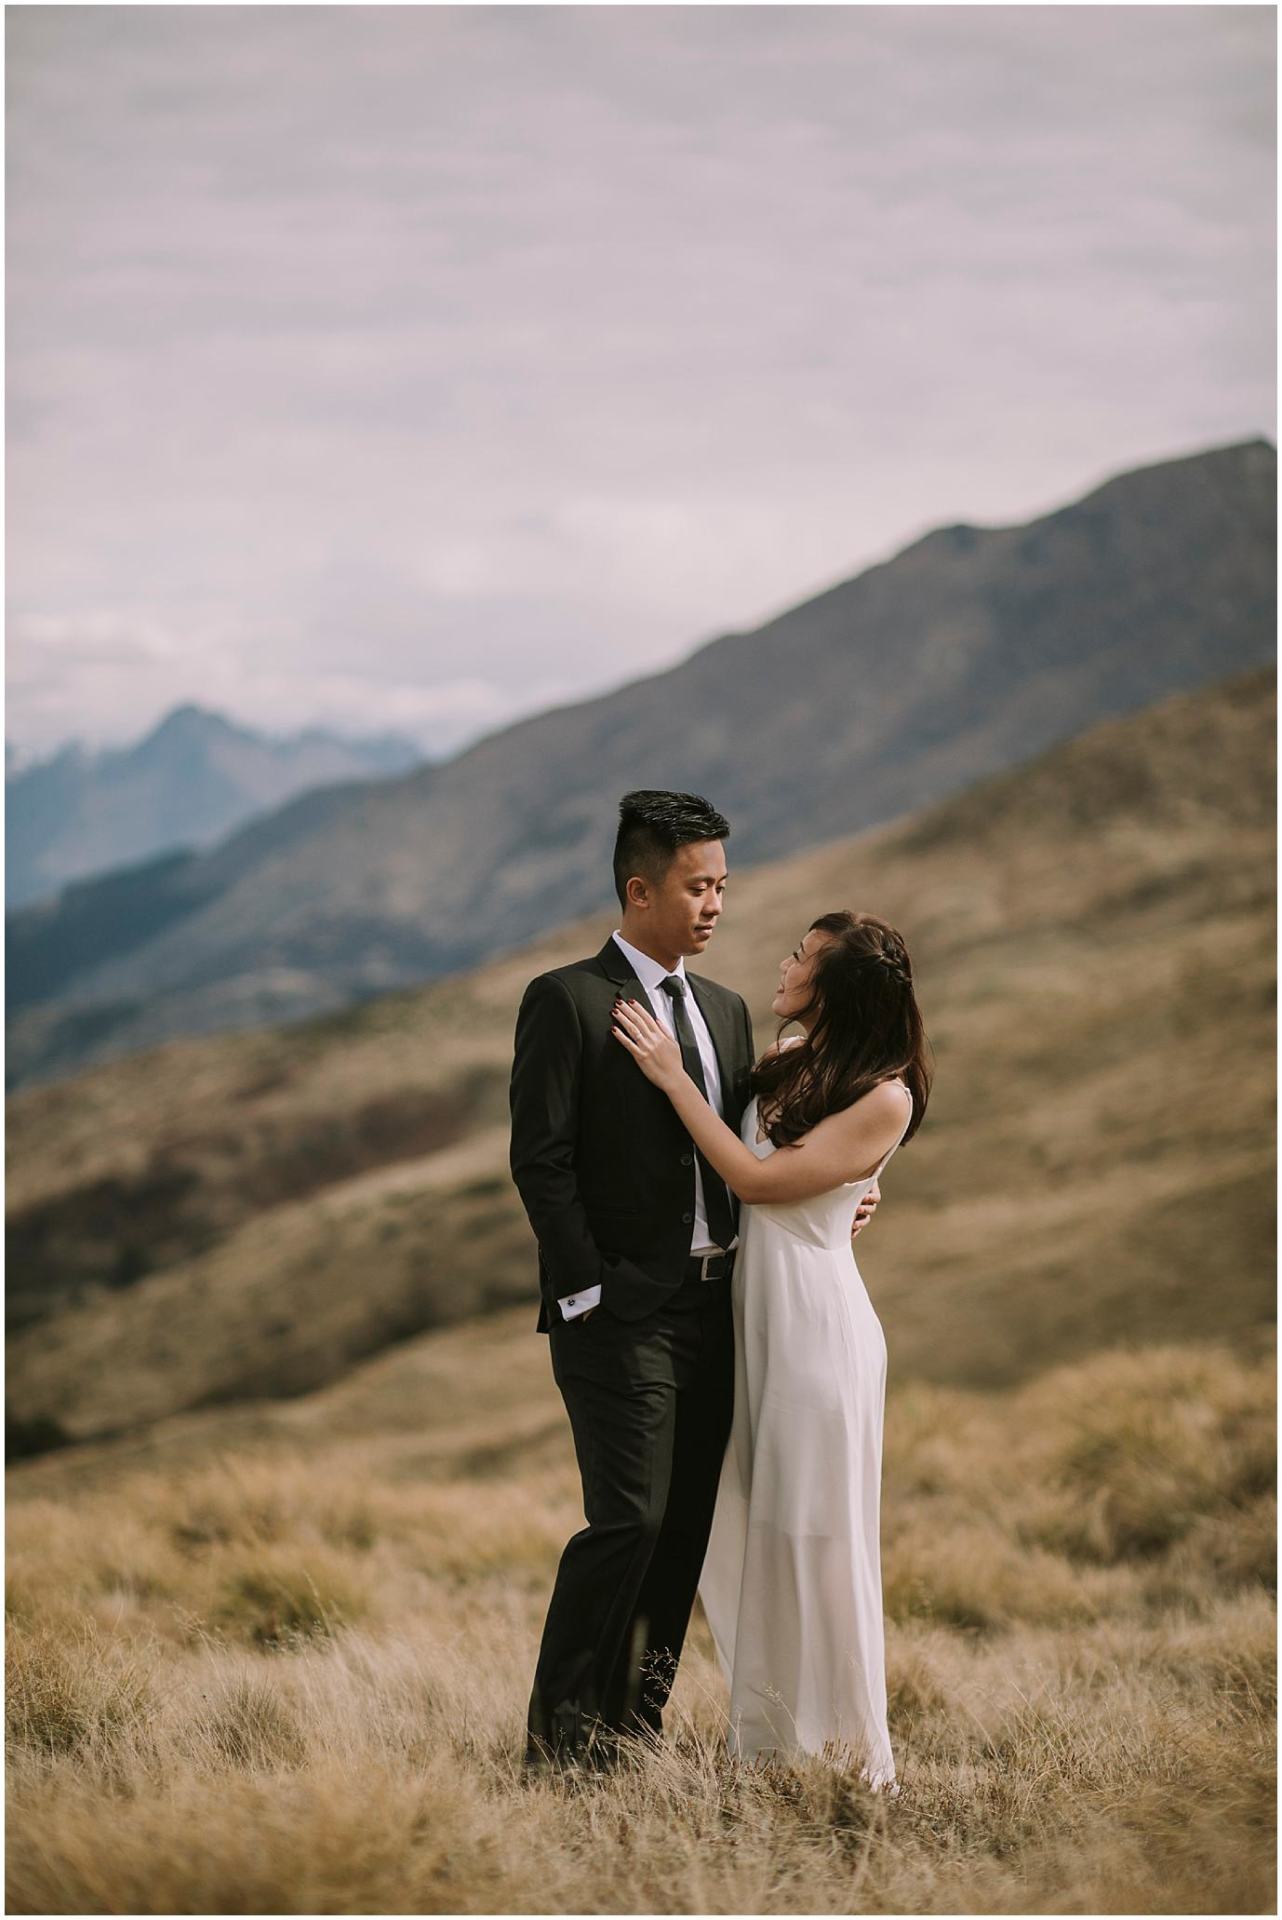 Charlotte Kiri Photography - Pre-Wedding photography with the bride wearing an elegant long cream slip gown as she puts her hand on the groom's chest who is wearing a smart black dinner suit, as they gaze at each other in a field with mountains in the background in Wanaka, New Zealand